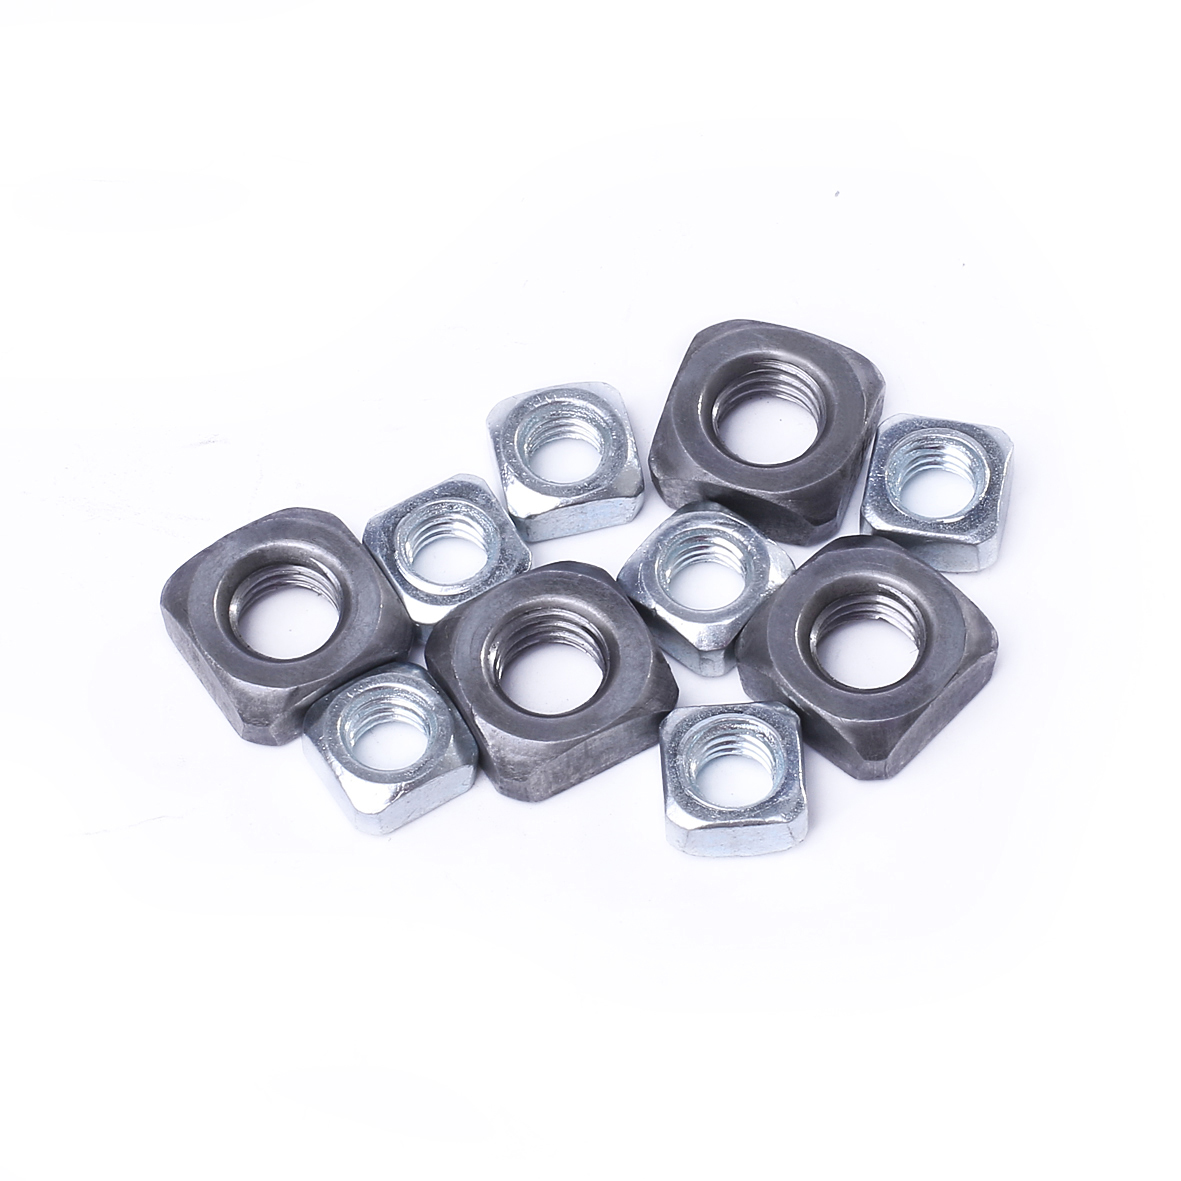 Square nut Featured Image